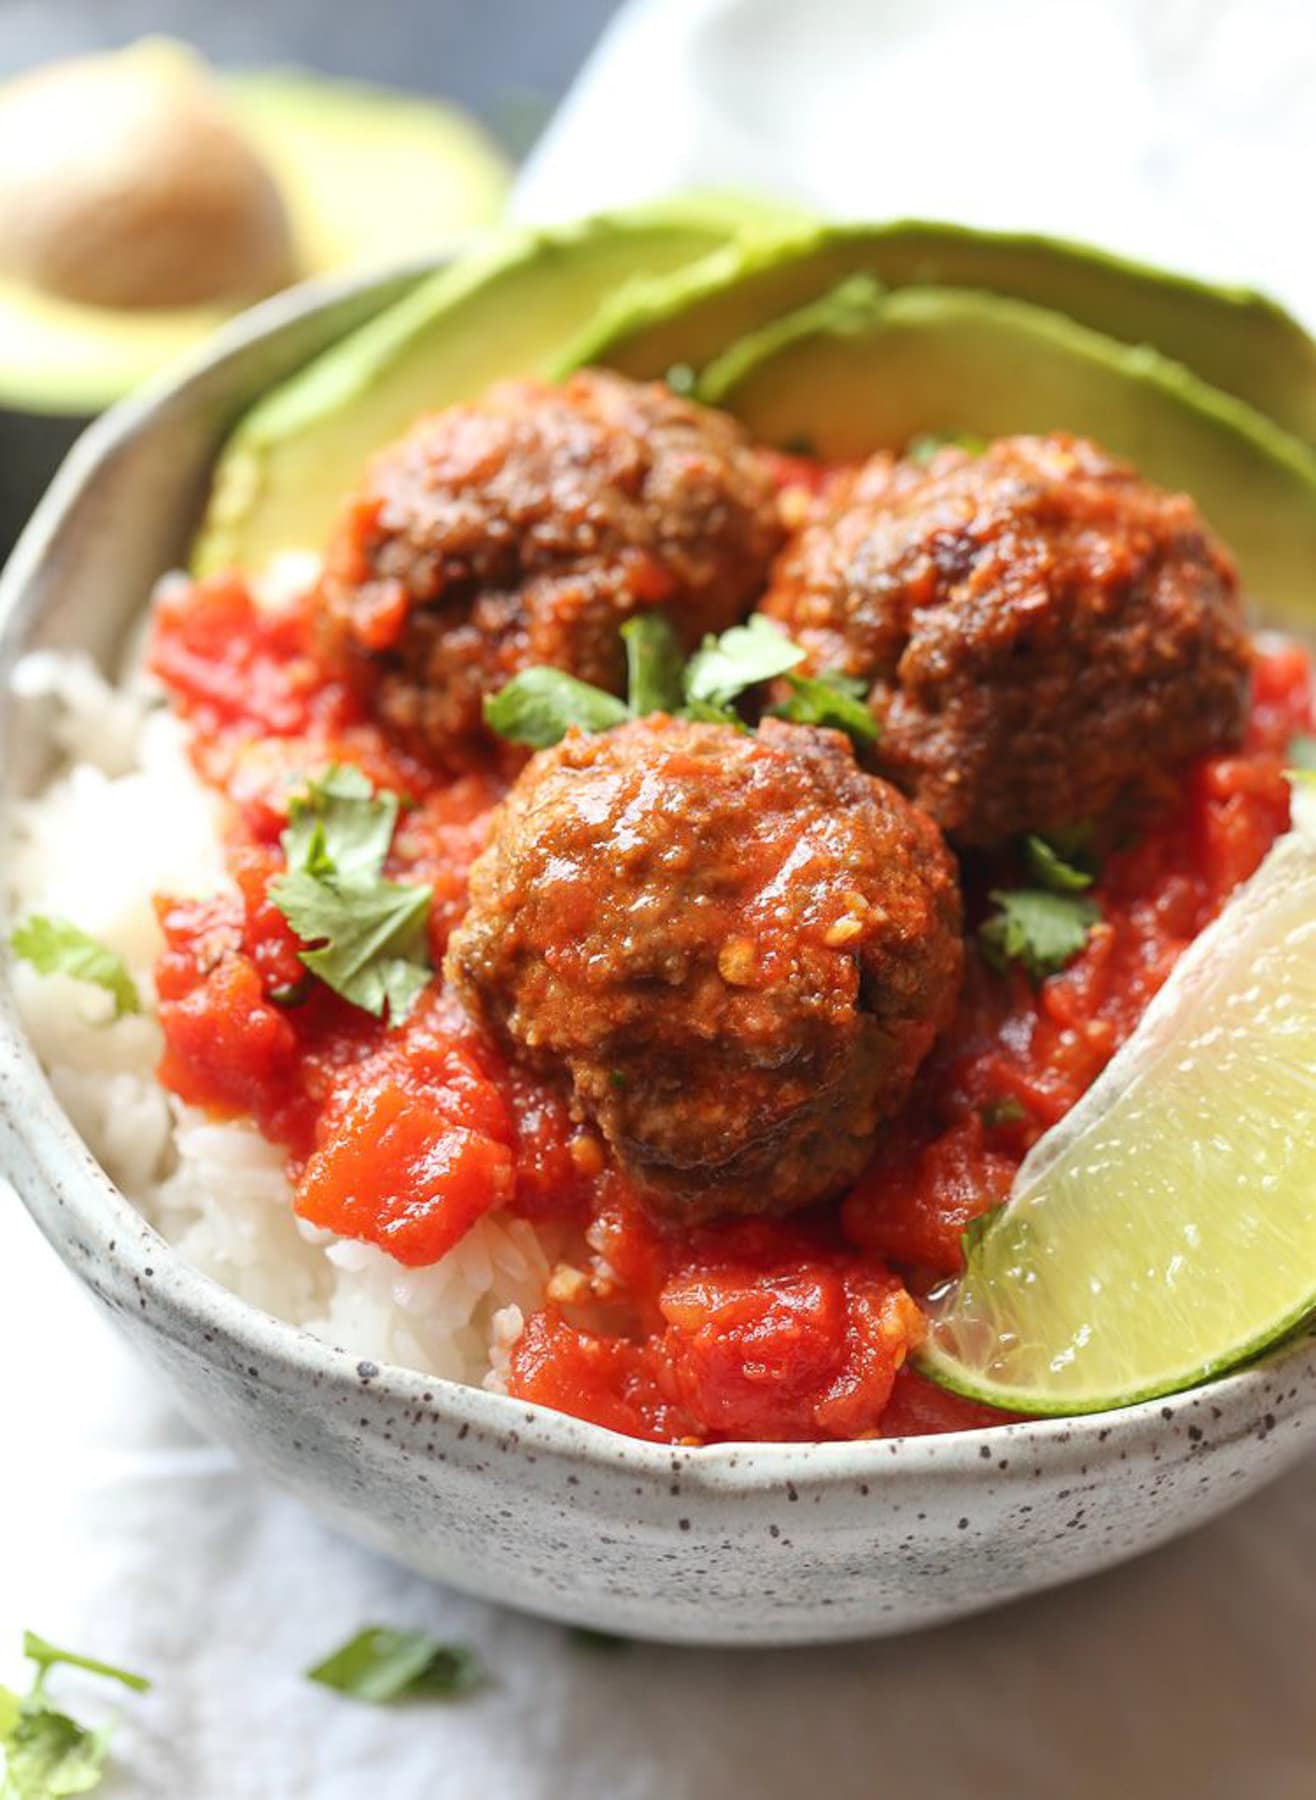 Chipotle meatballs served on rice with avocado 